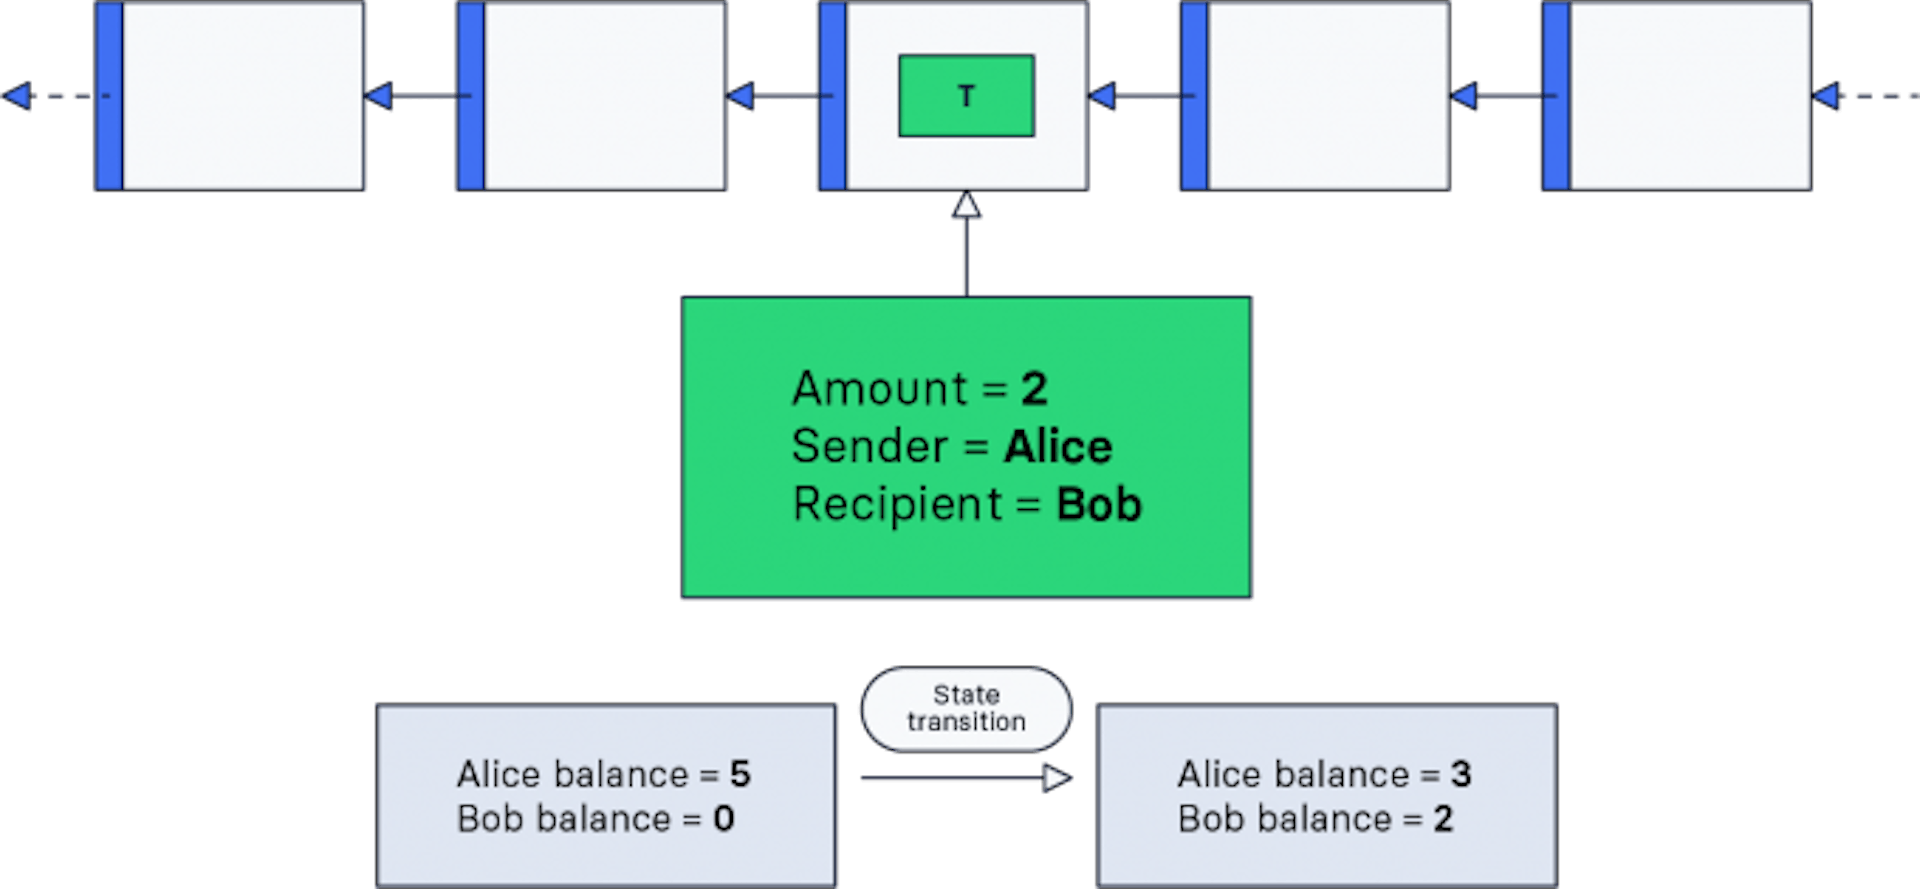 Figure 1: In the initial state of the blockchain, Alice has 5 LSK and Bob has none. Alice sends 2 LSK to Bob with a token transfer transaction. After the transaction has been processed, the blockchain transitions to a state where Alice has 3 LSK and Bob 2 LSK.